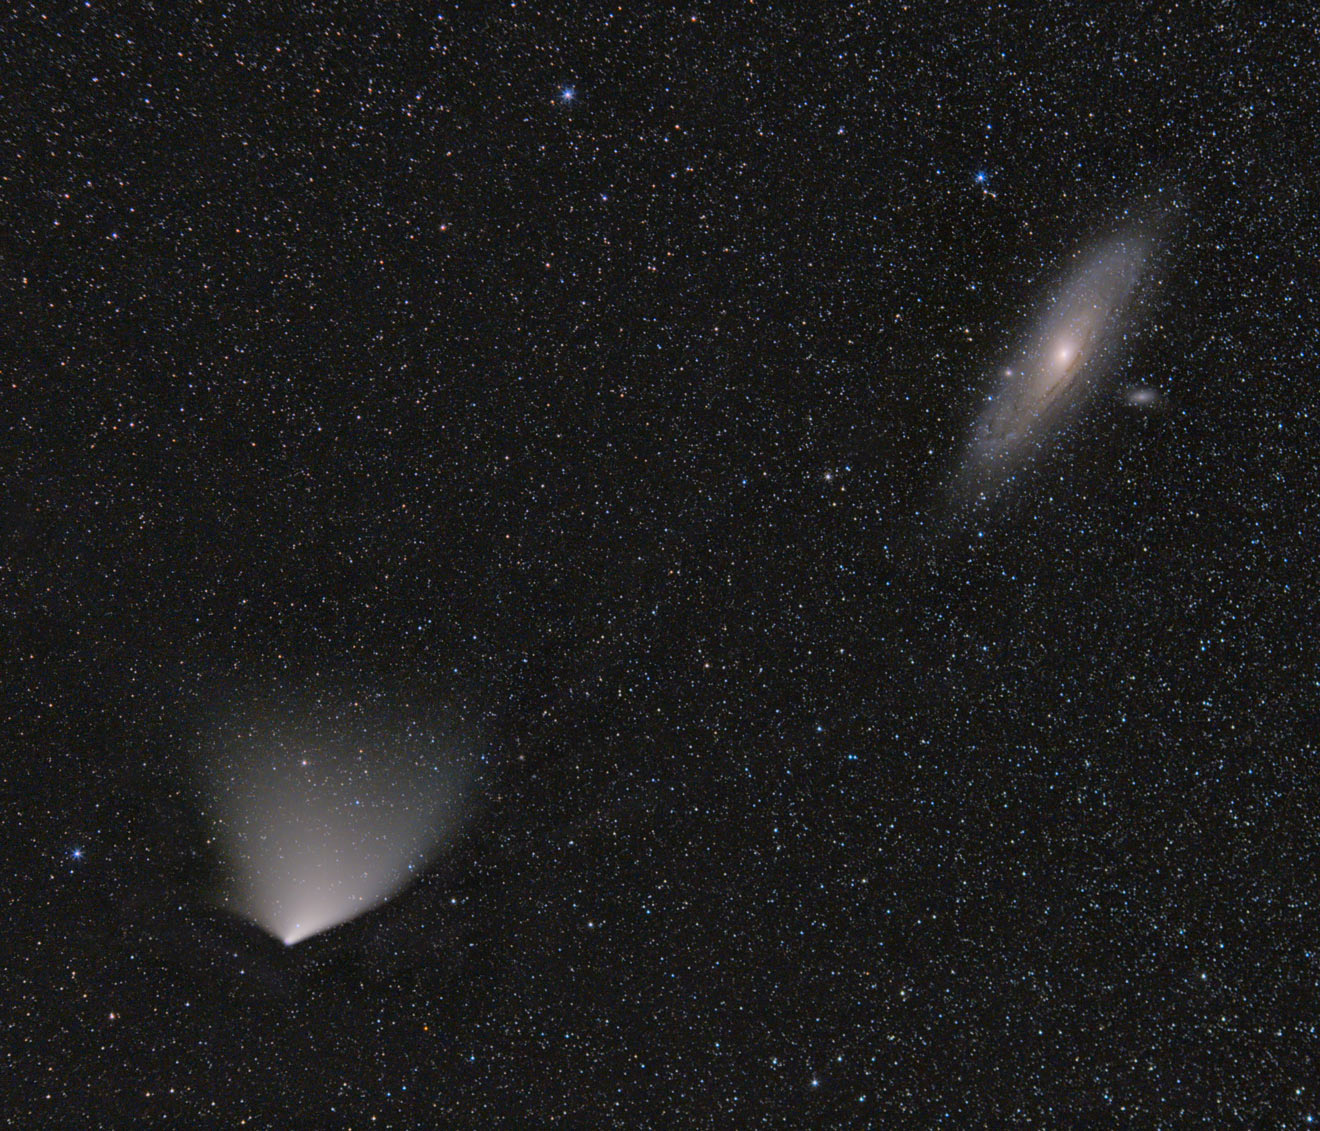 Comet PANSTARRS and the Andromeda Galaxy